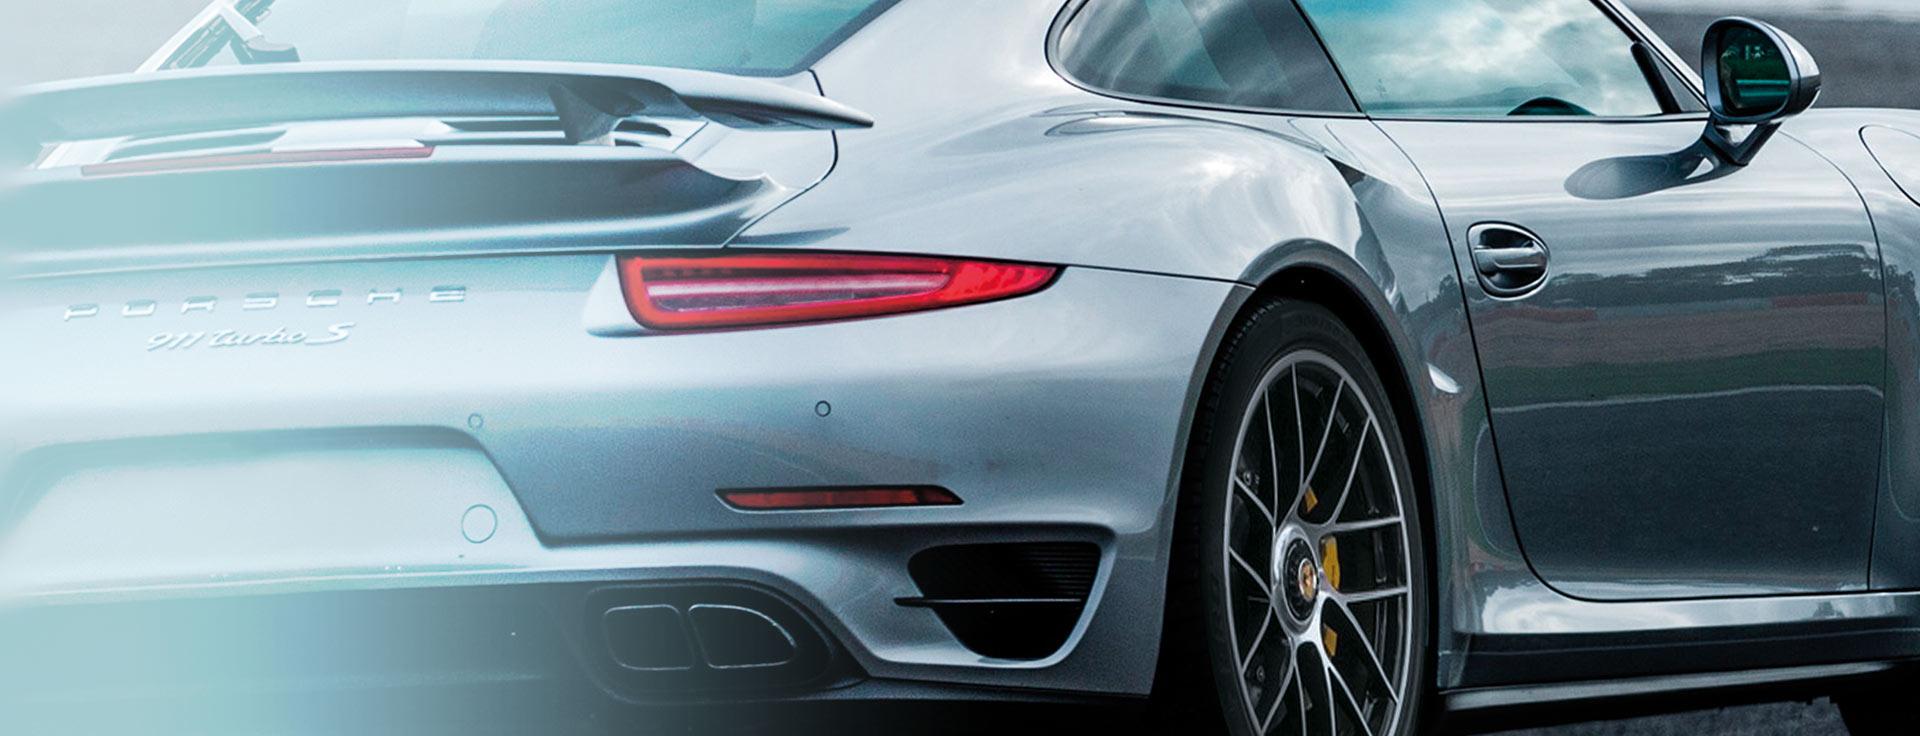 Porsche - The first manufacturer to ask Pirelli for special tyres